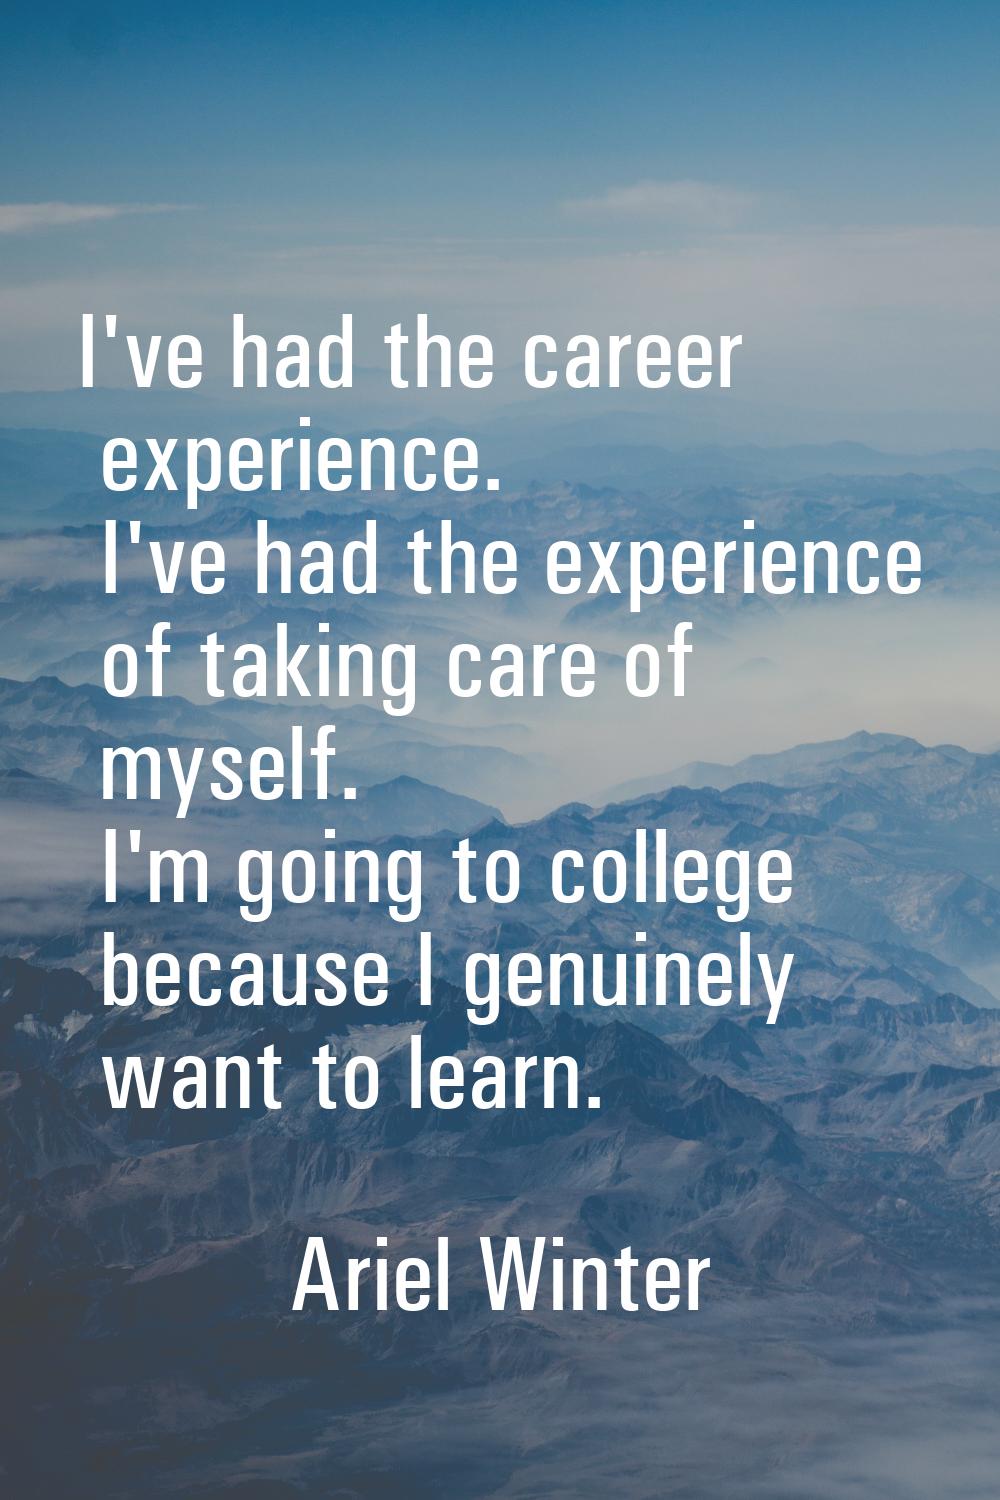 I've had the career experience. I've had the experience of taking care of myself. I'm going to coll